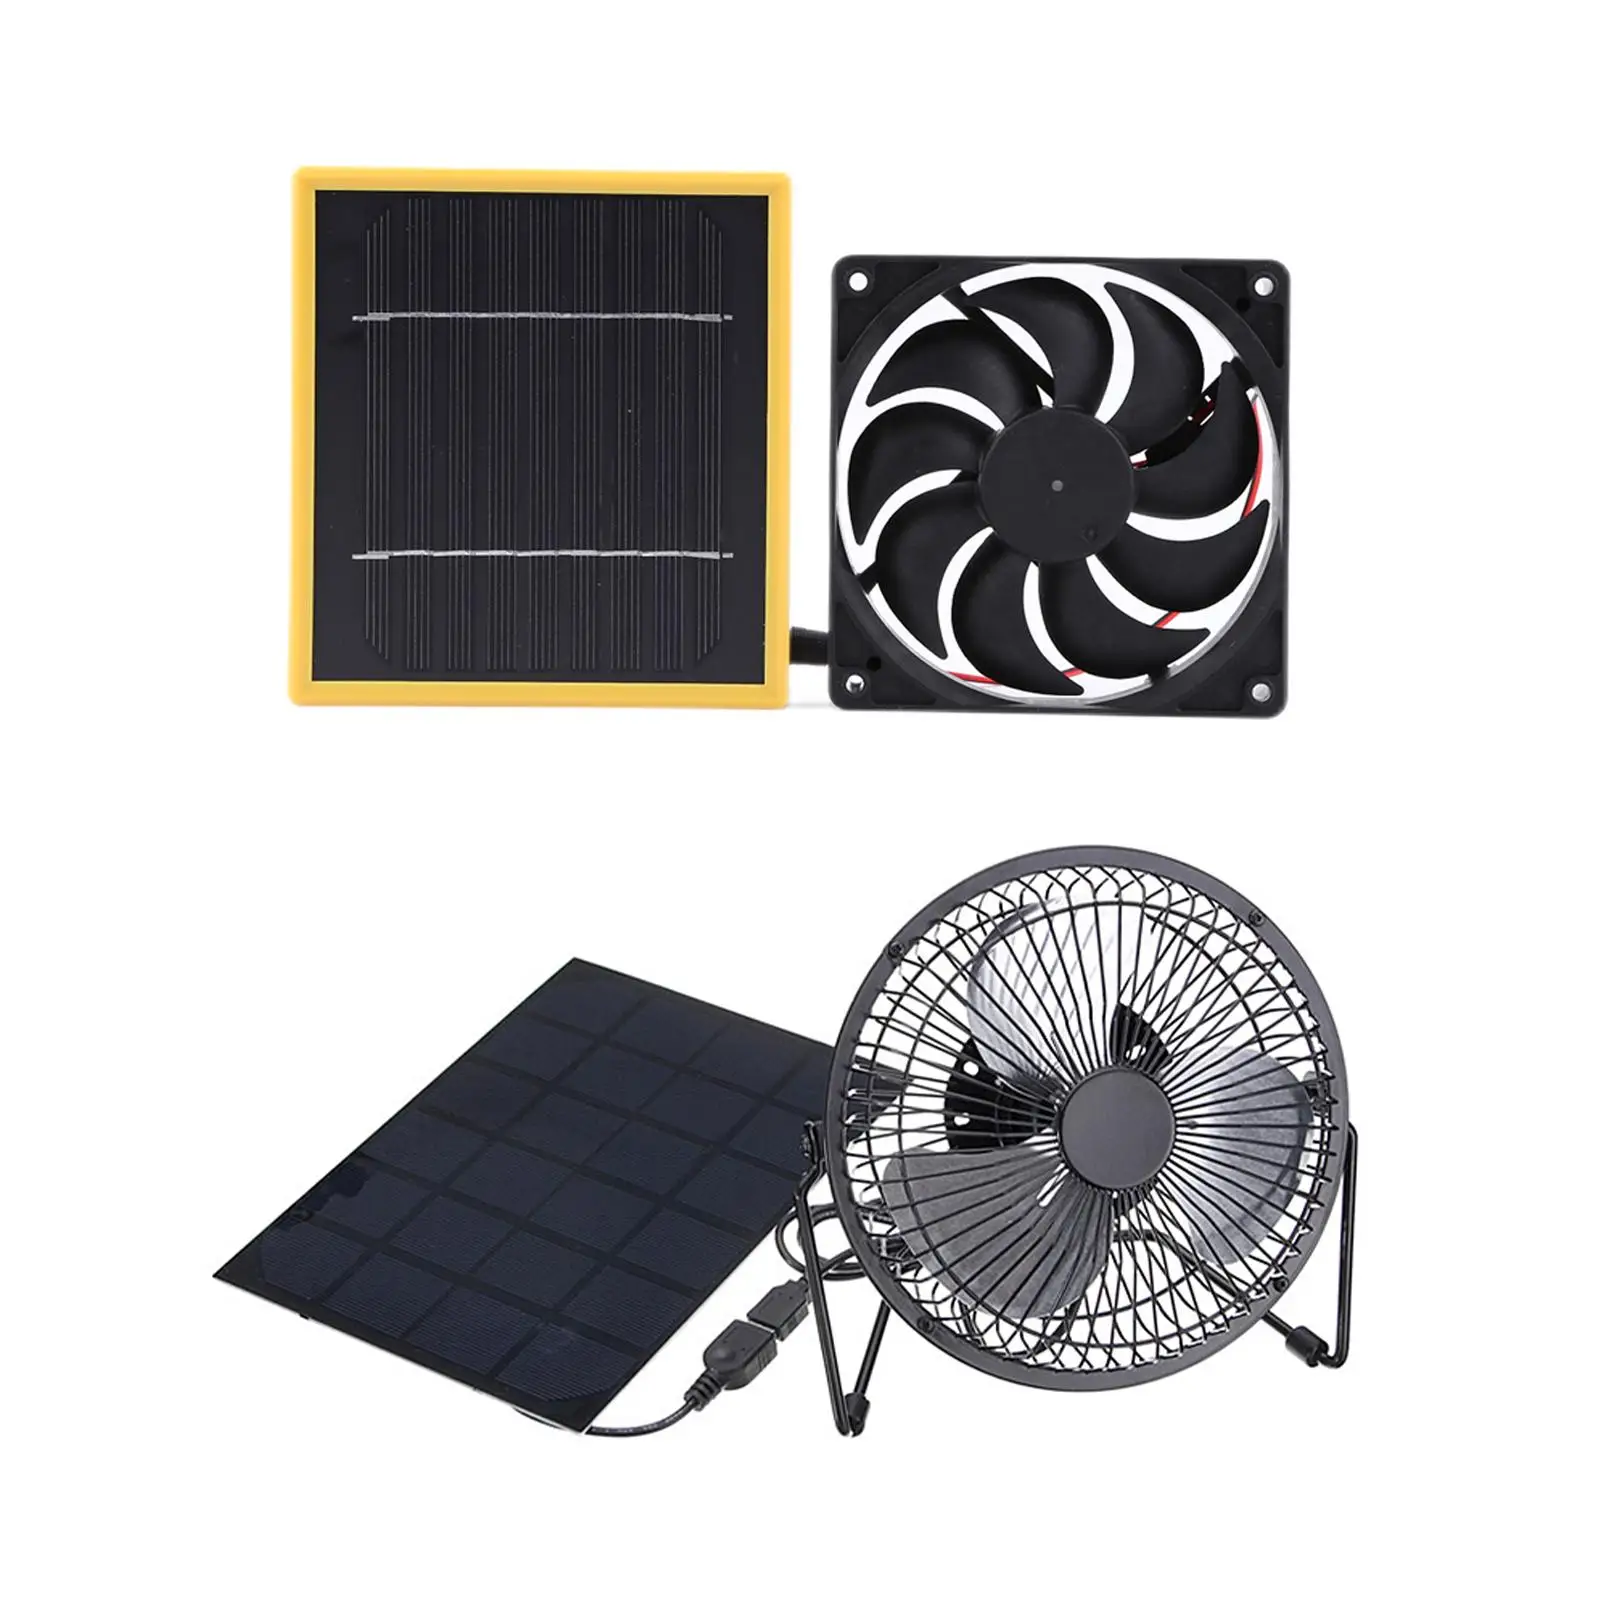 Household Solar Ventilator Air Extractor Powered Fan for Greenhouse, , Camping, Outdoor RV,